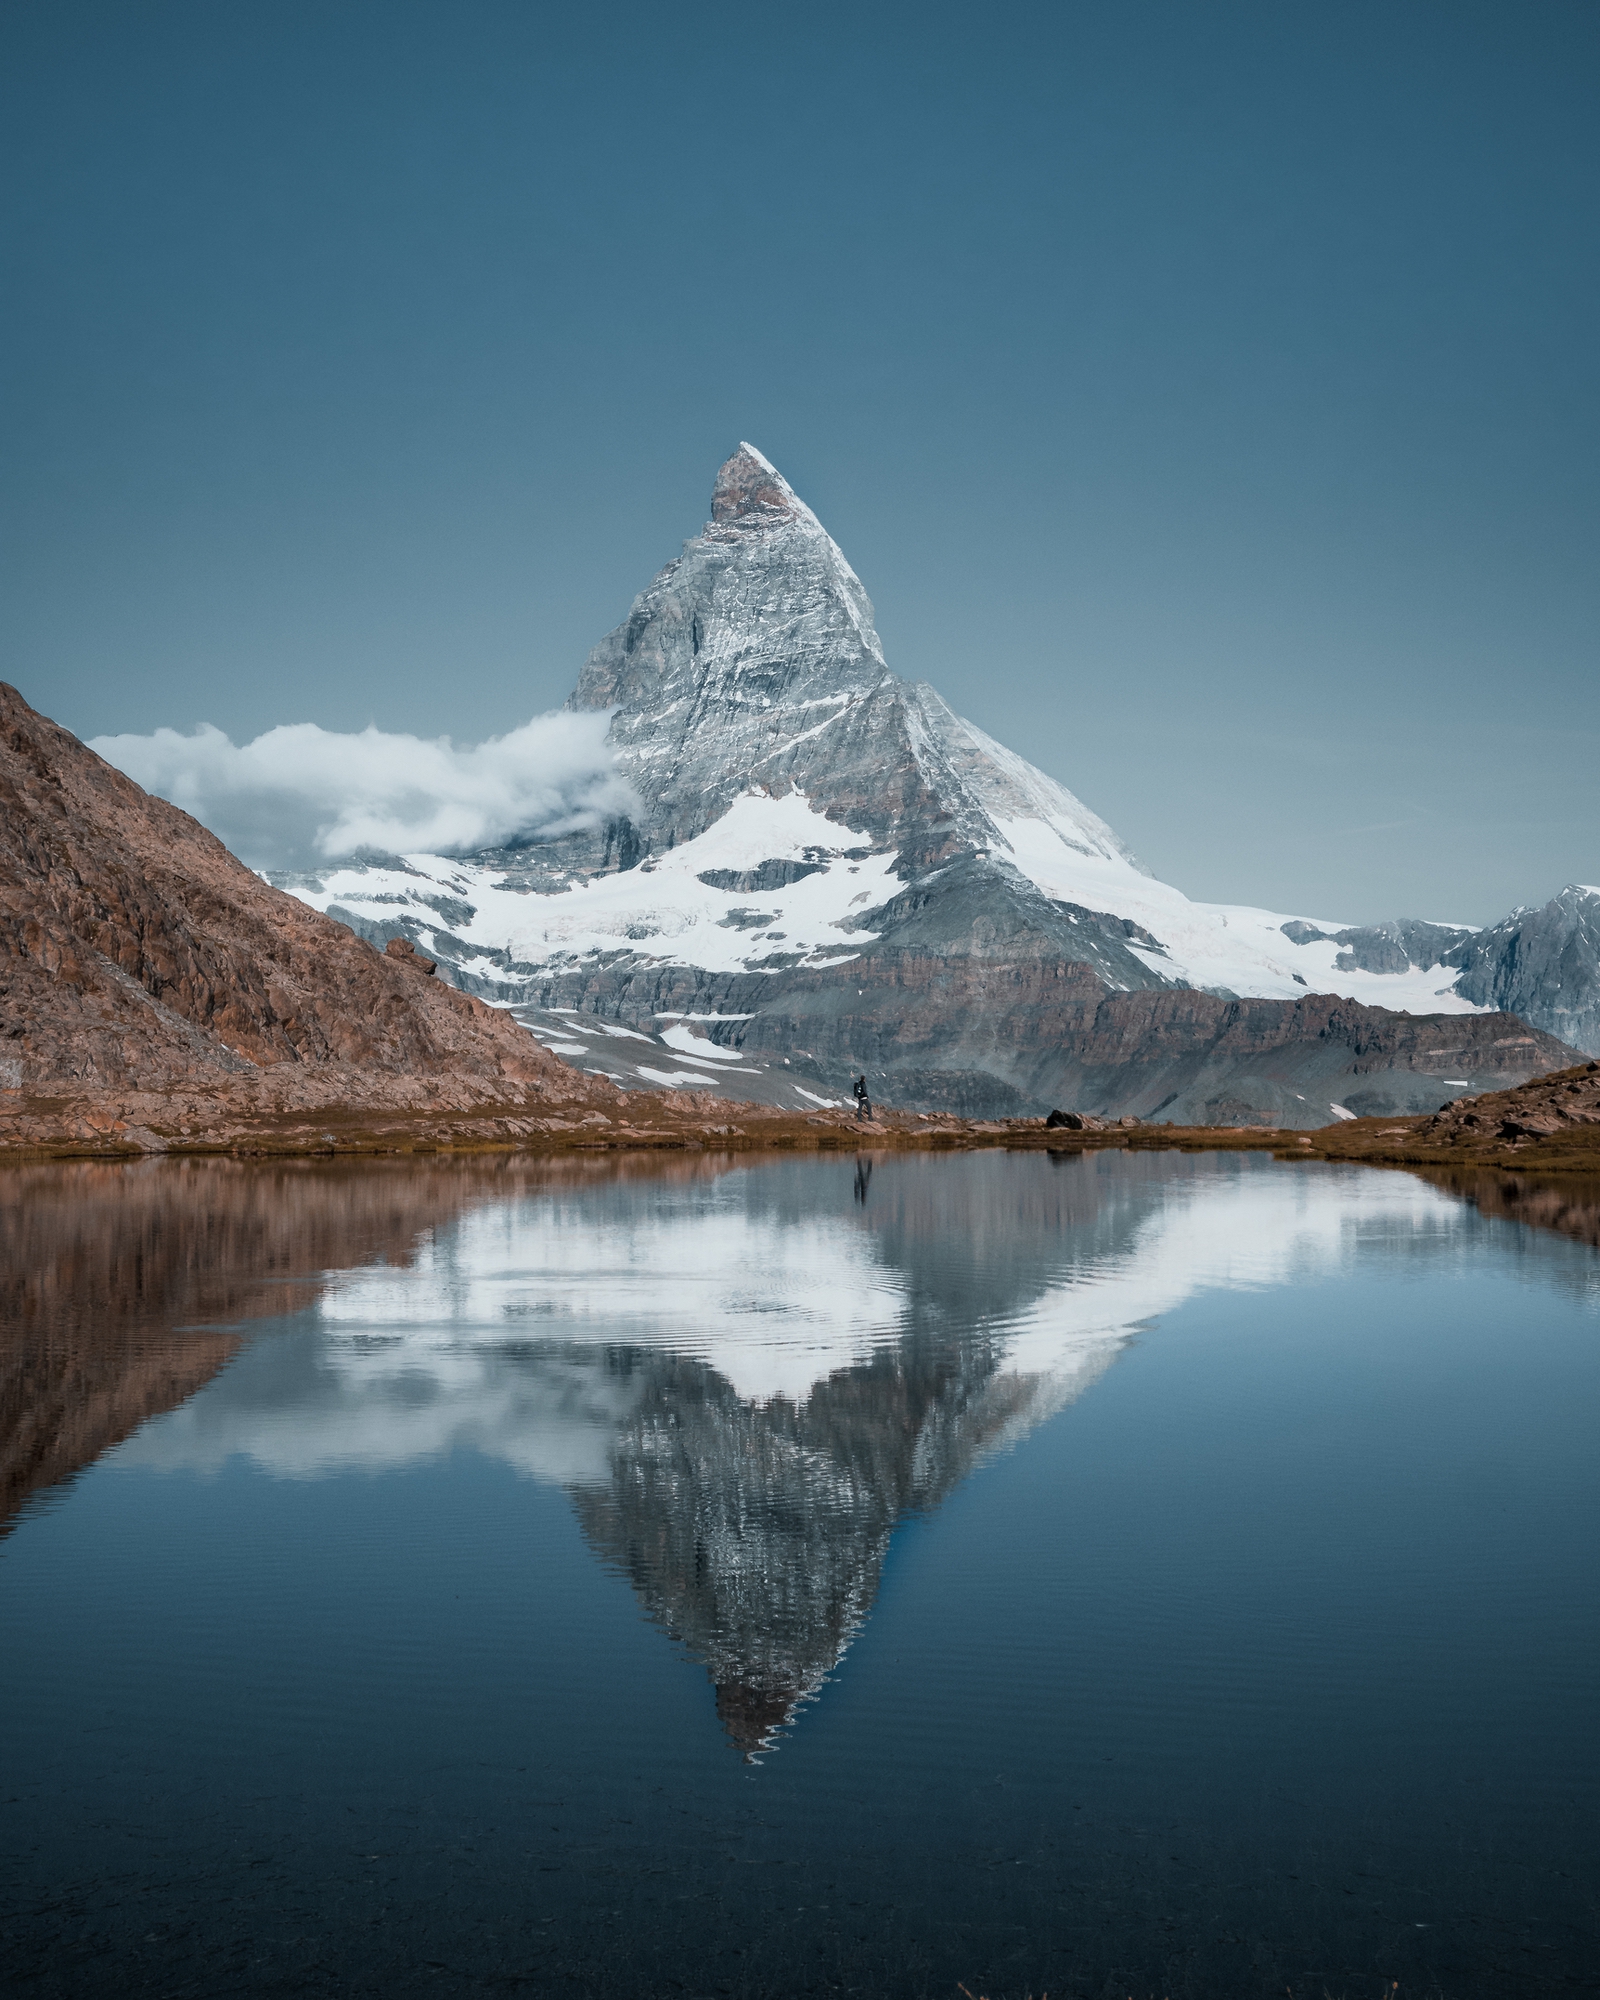 beautiful view of the famous riffelsee lake in the matterhorn mountains in switzerland